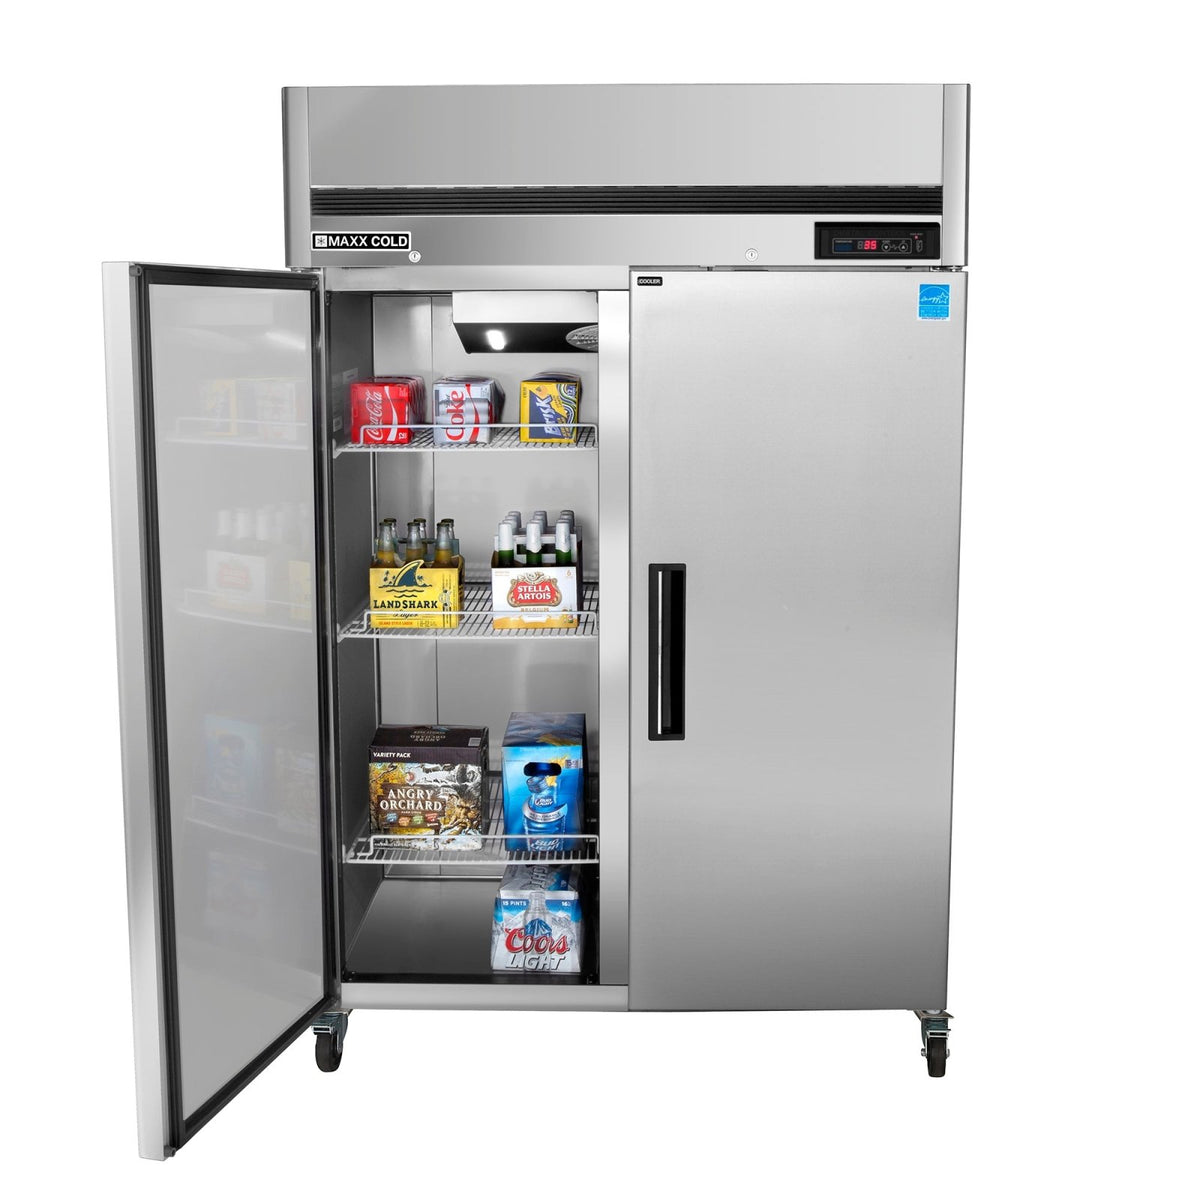 Maxx Cold MCRT - 49FDHC Double Door Reach - In Refrigerator, Top Mount, 54"W, 49 cu. ft. Storage Capacity, in Stainless Steel - TheChefStore.Com